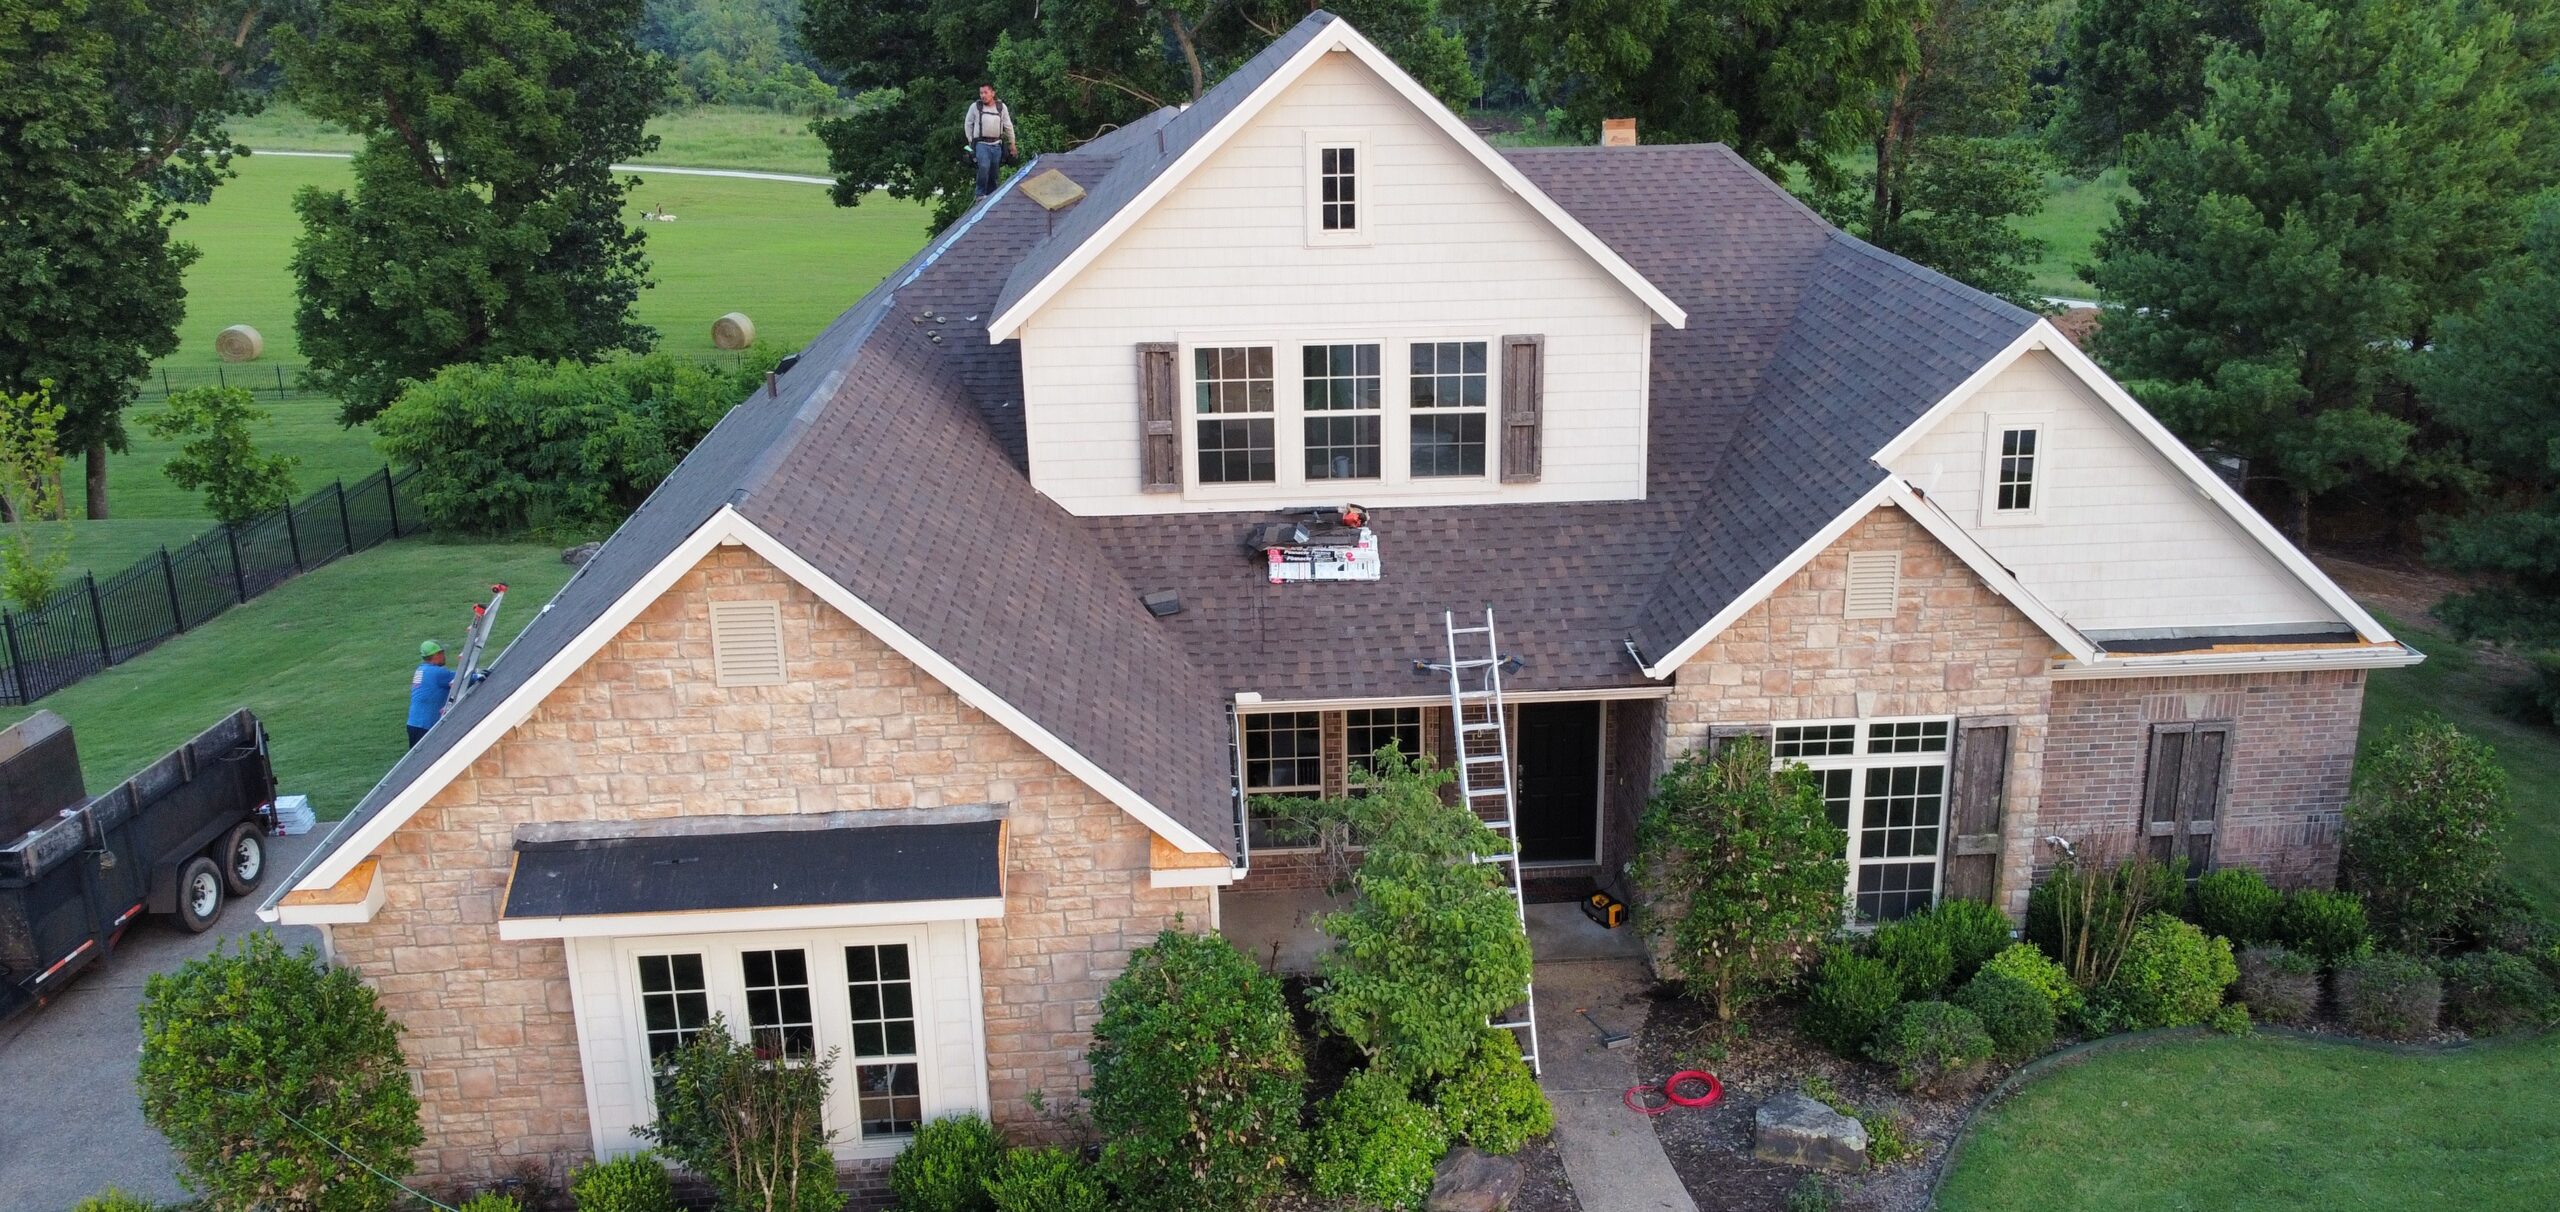 Best roofing company in Kansas CIty